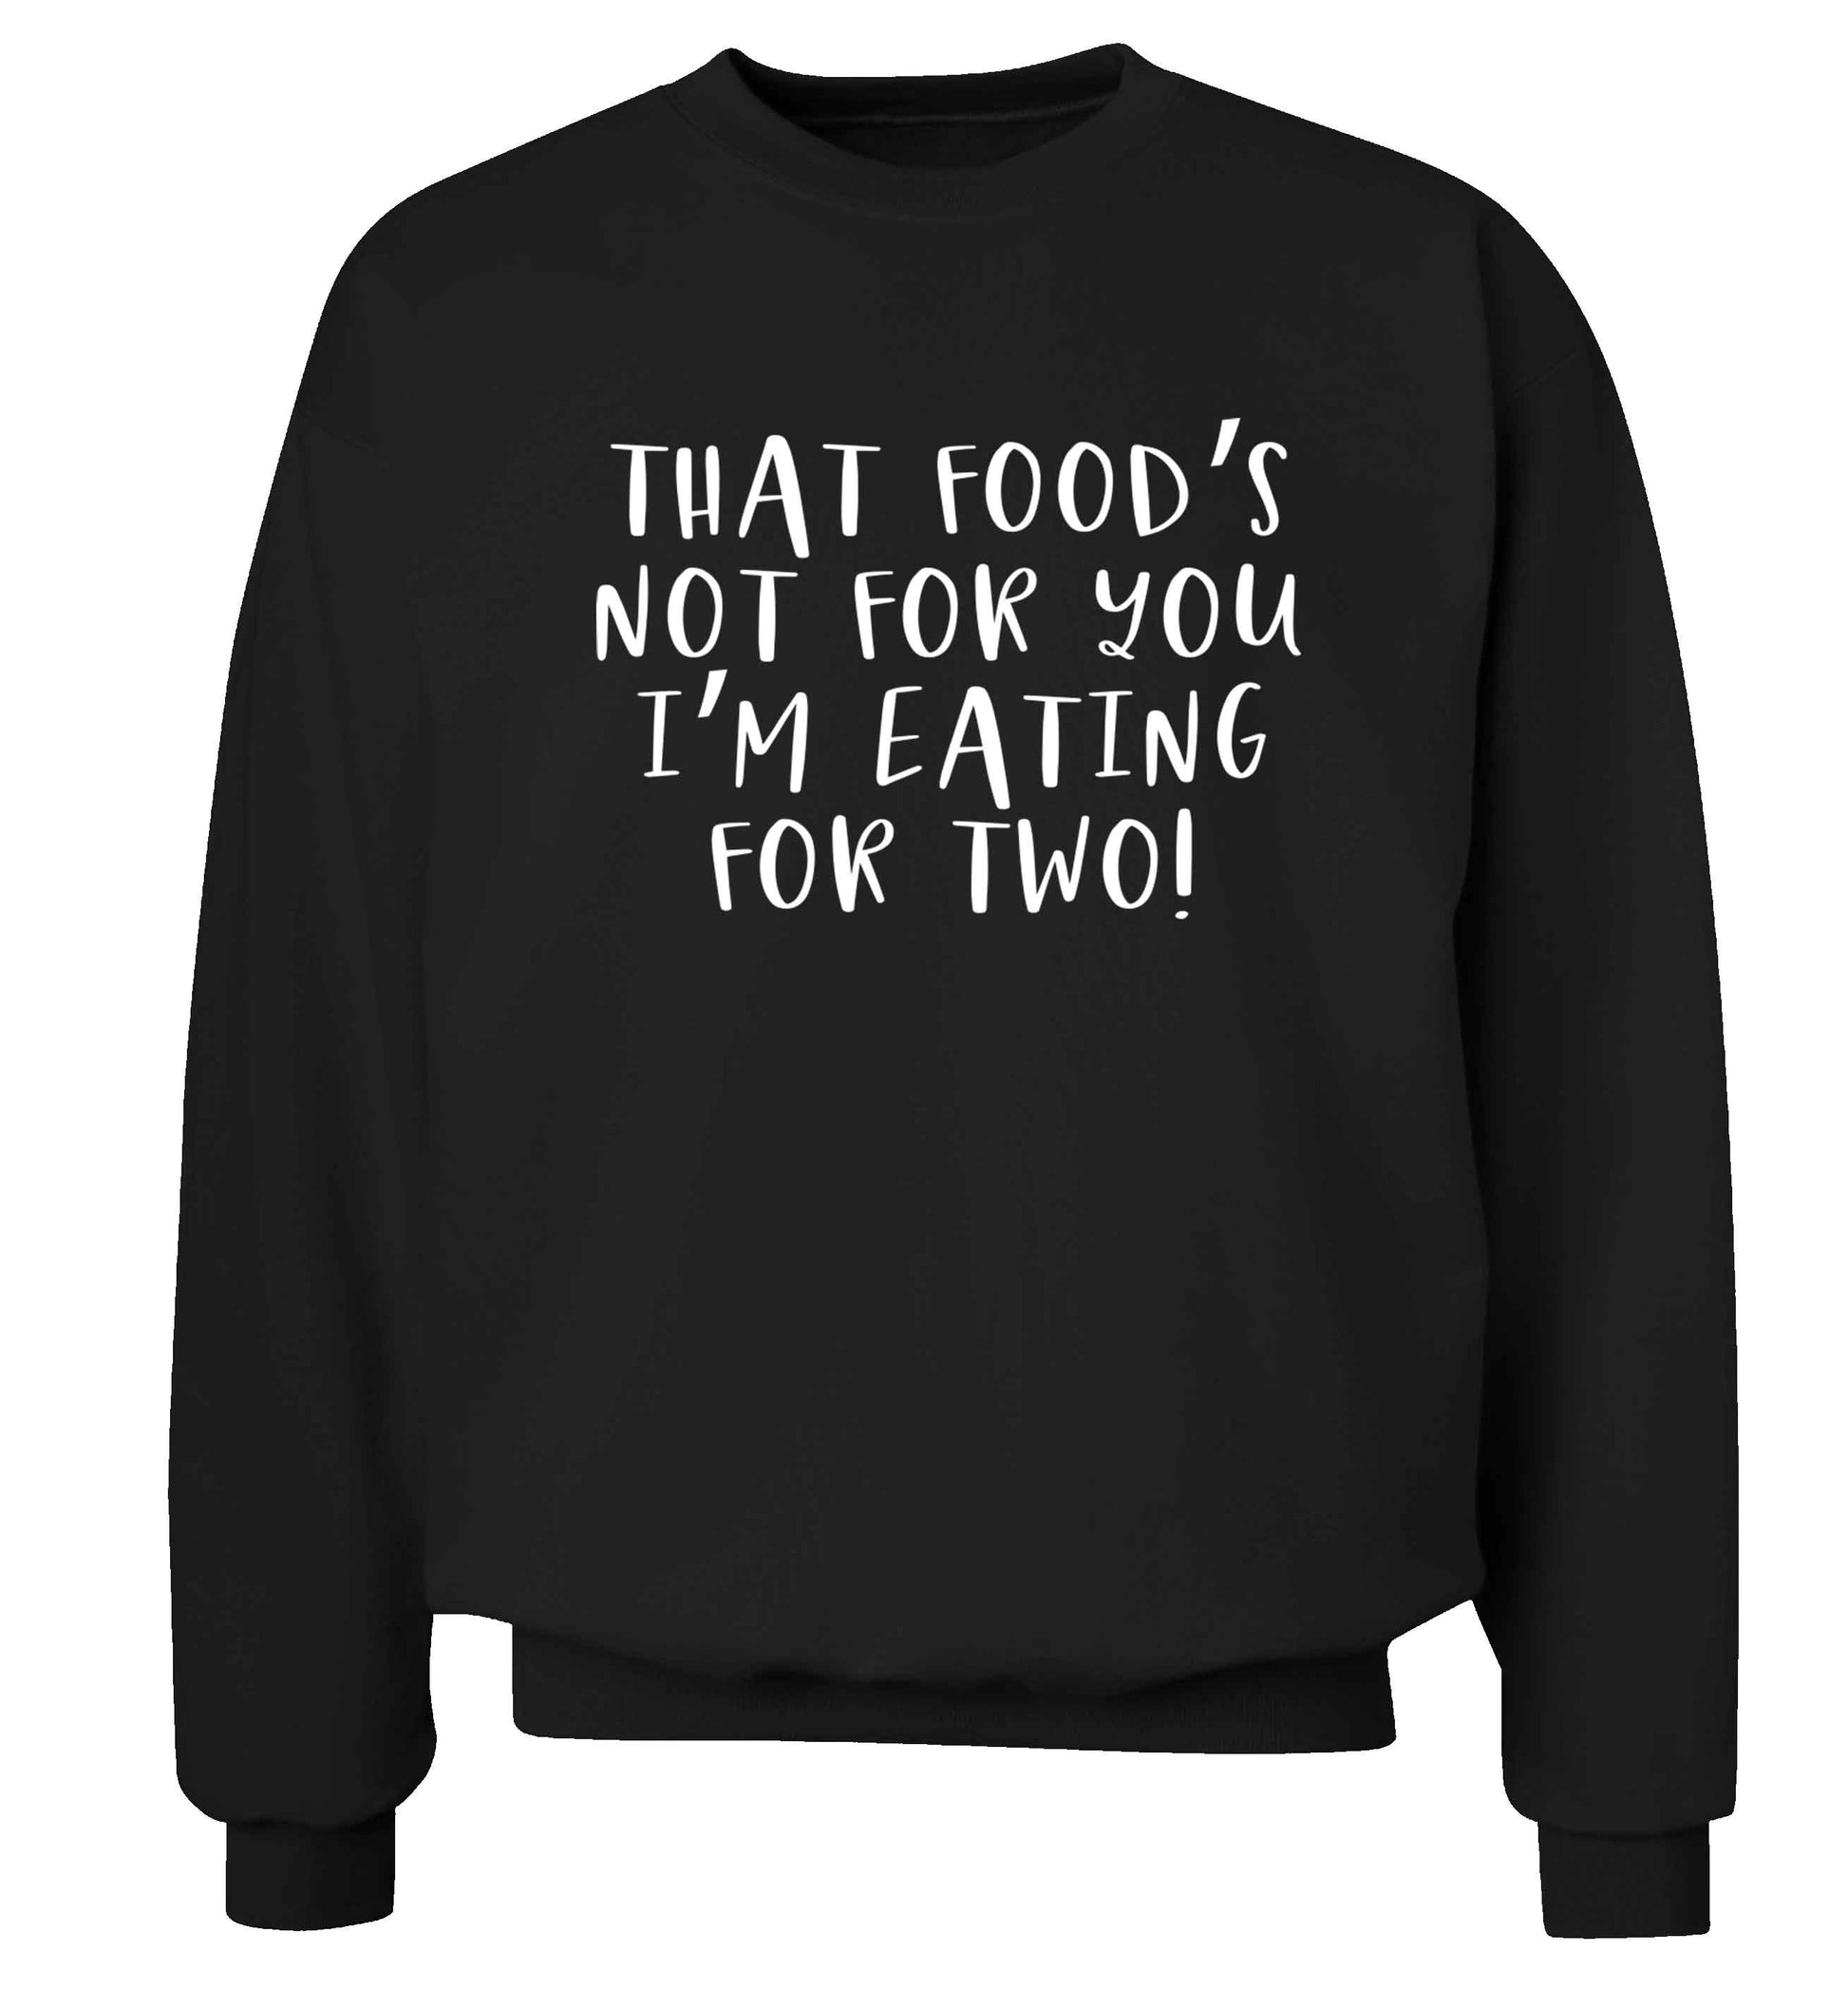 That food's not for you I'm eating for two Adult's unisex black Sweater 2XL